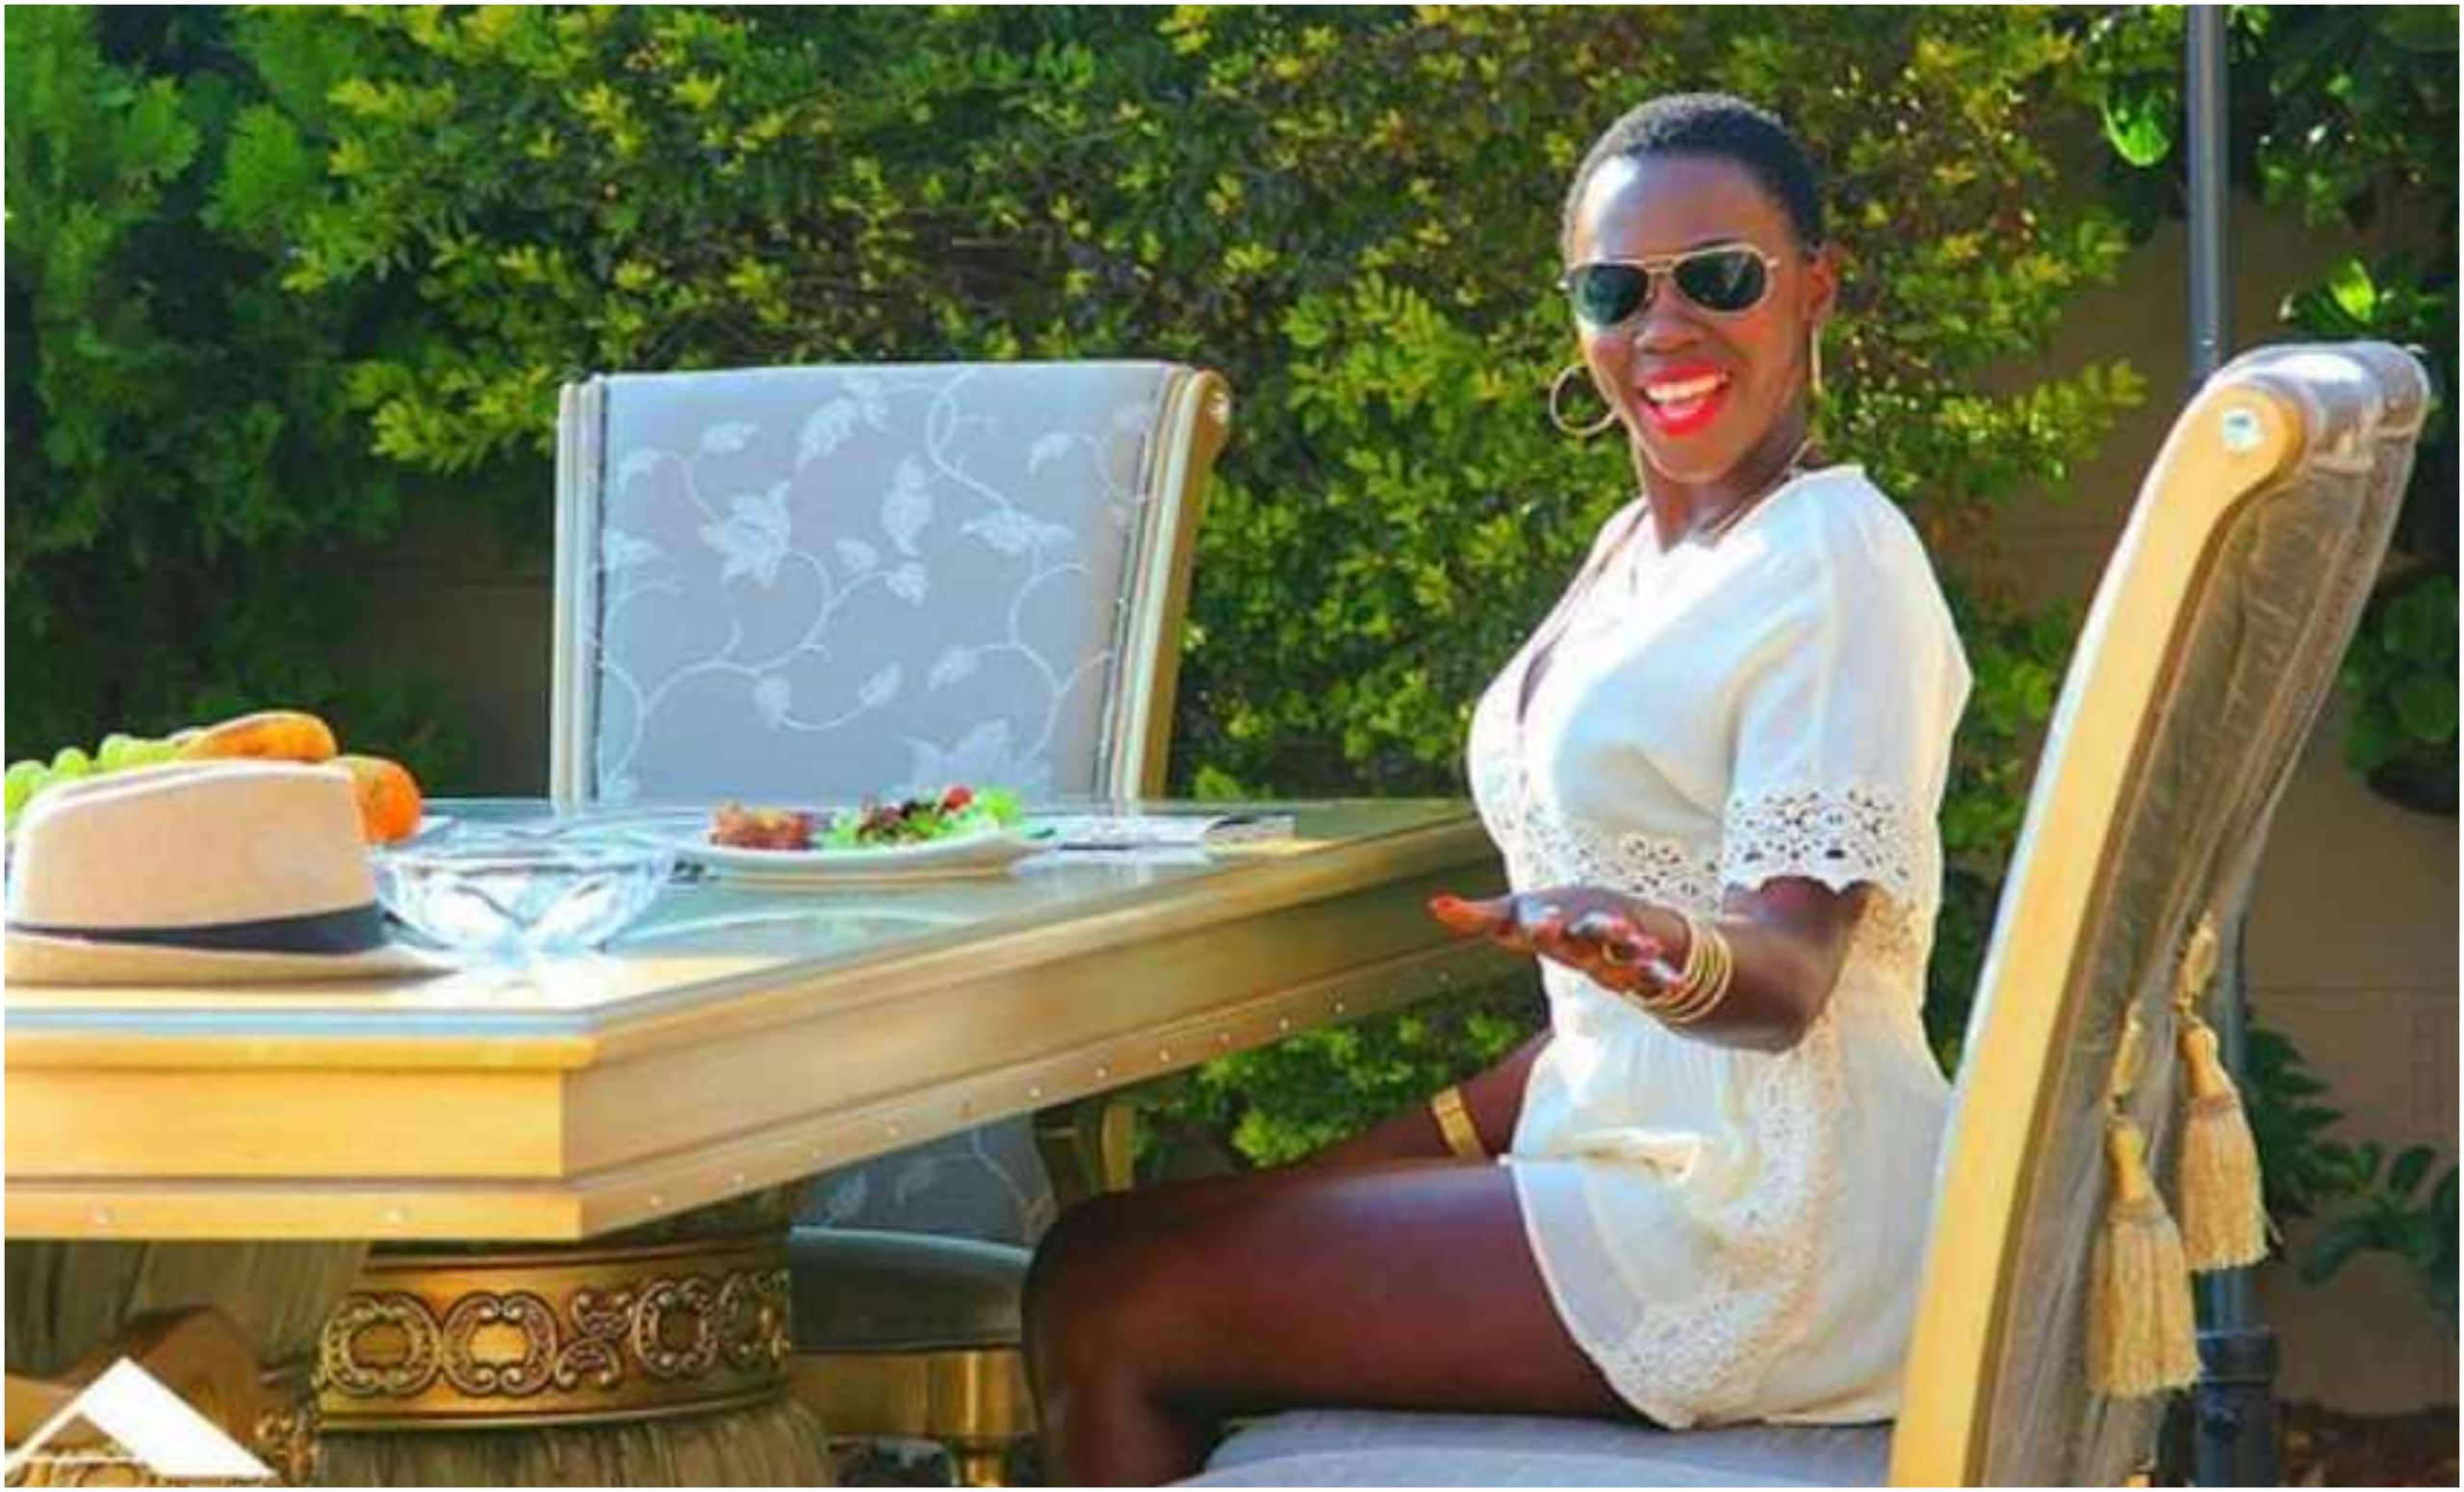 Akothee fashionably claps back at haters with detailed tour of her extravagant kitchen suite (Video)